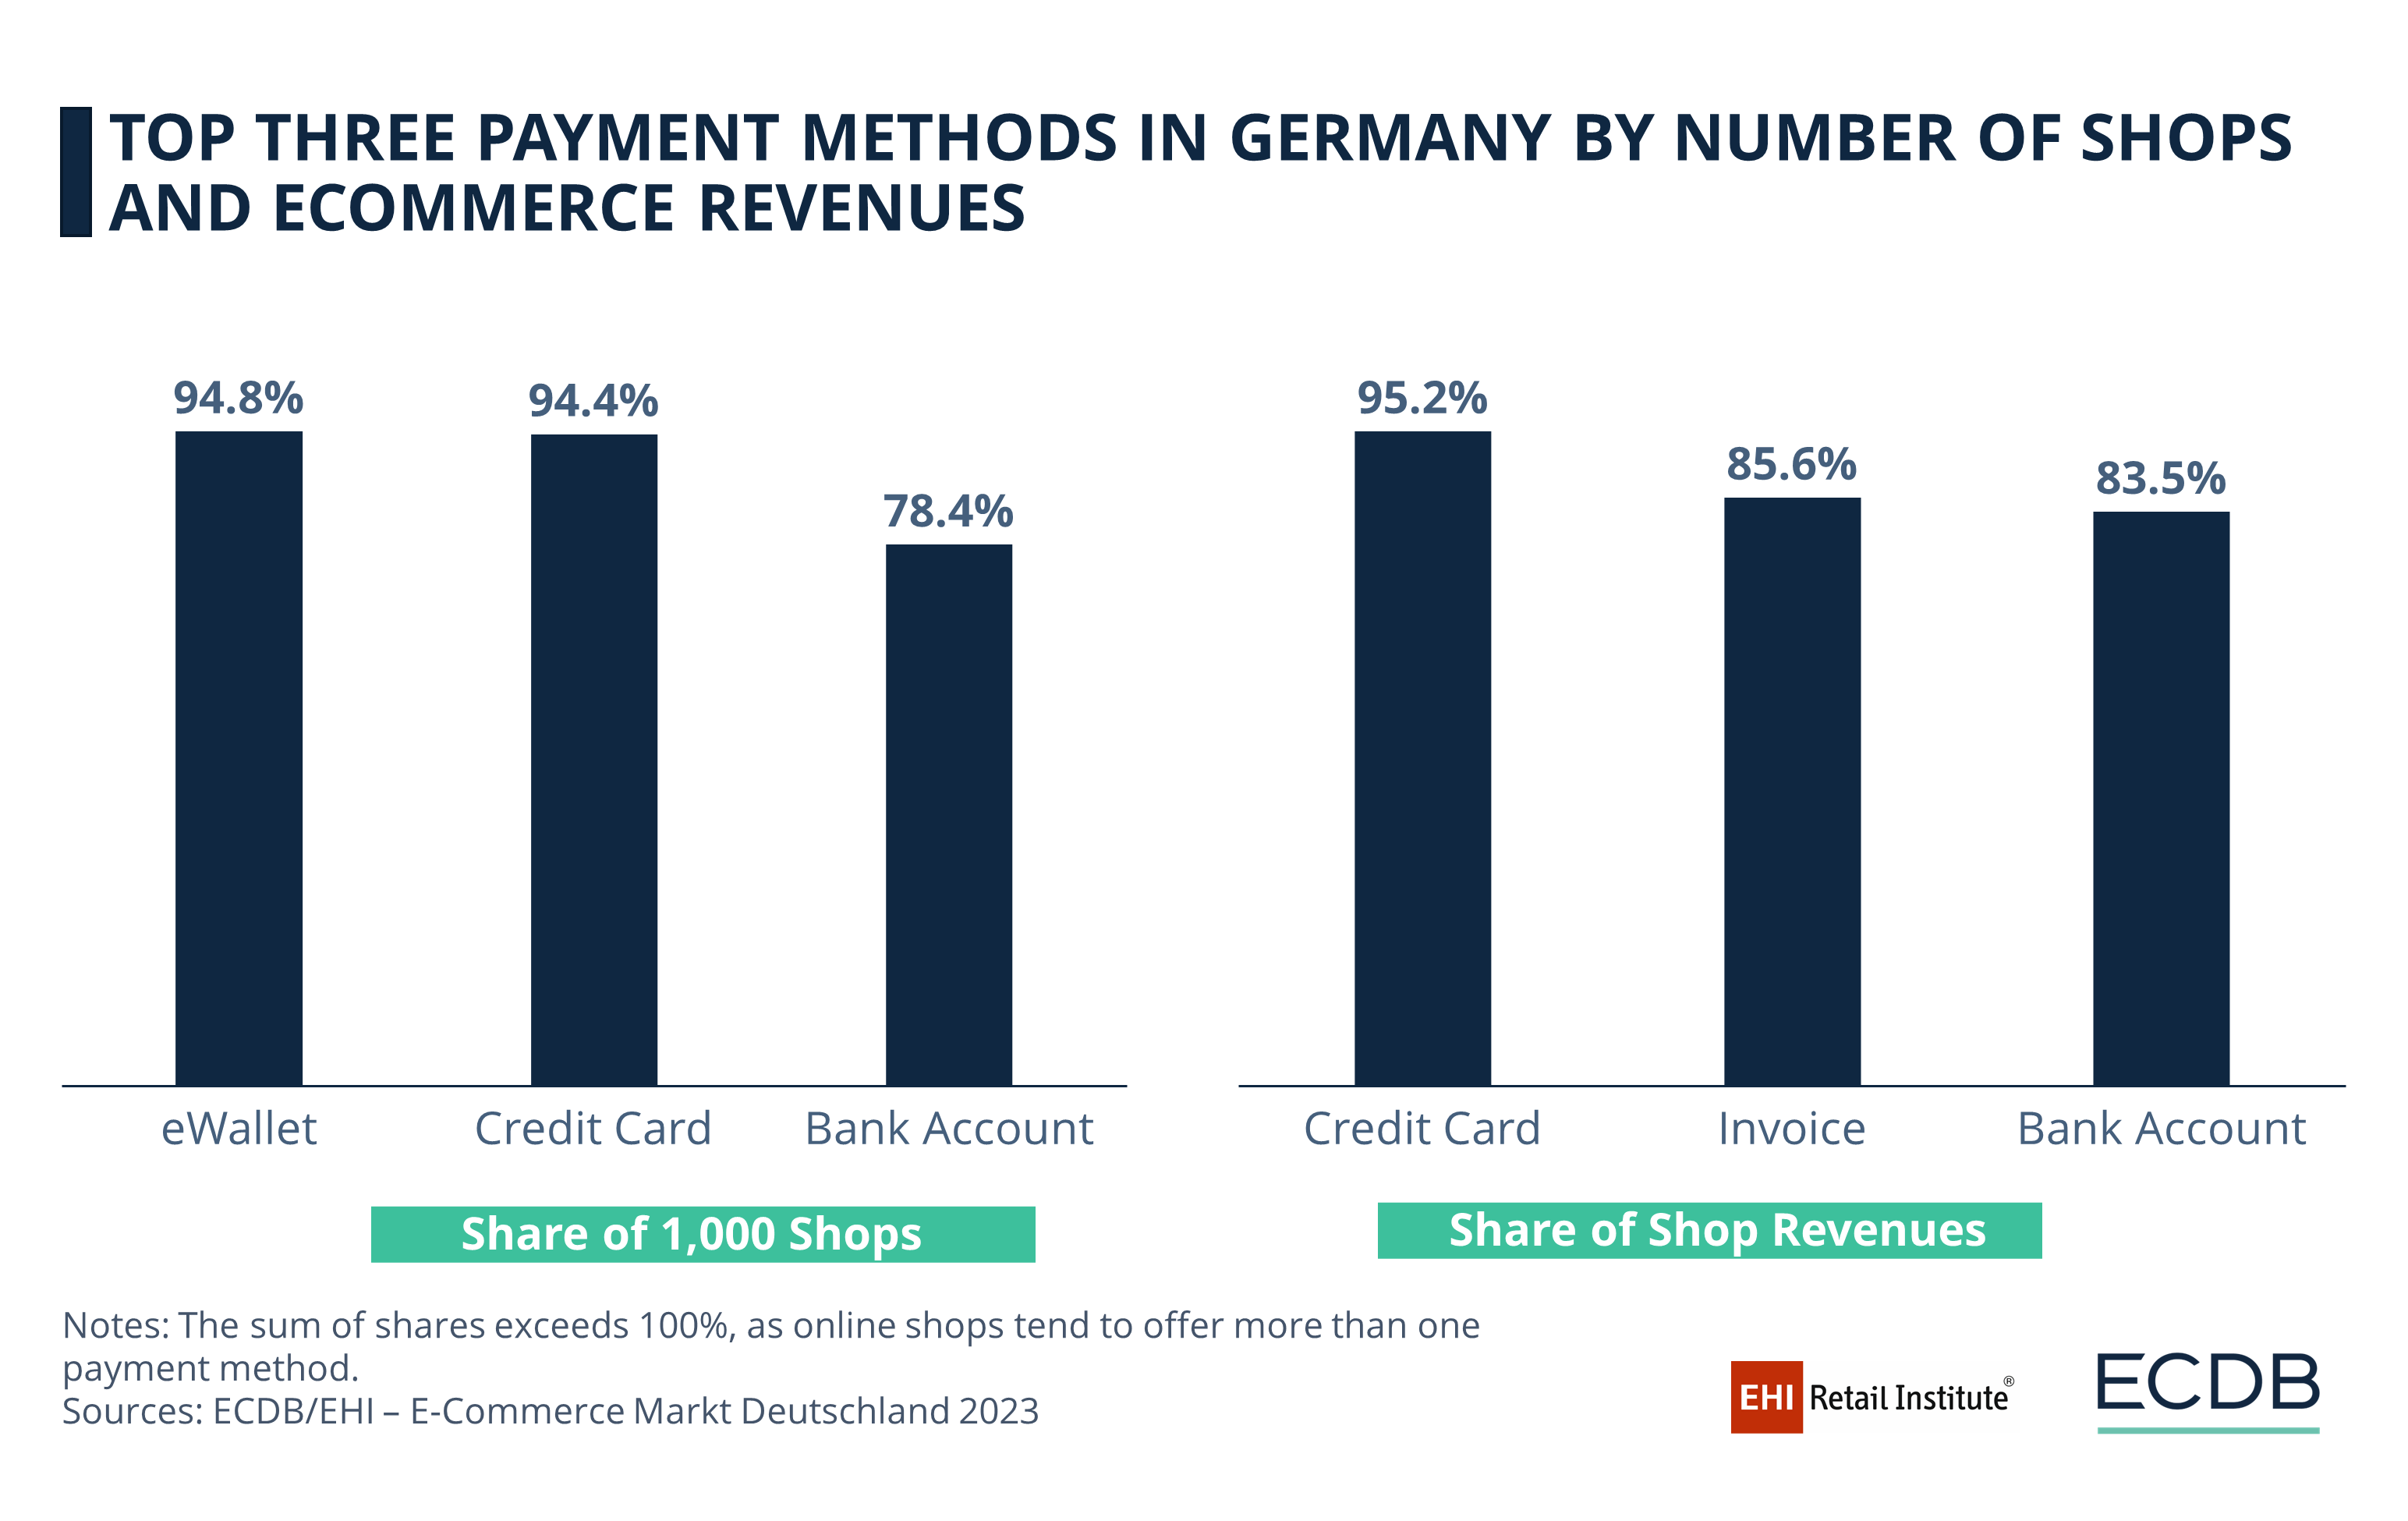 Top Three Payment Methods in Germany by Number of Shops and eCommerce Revenues